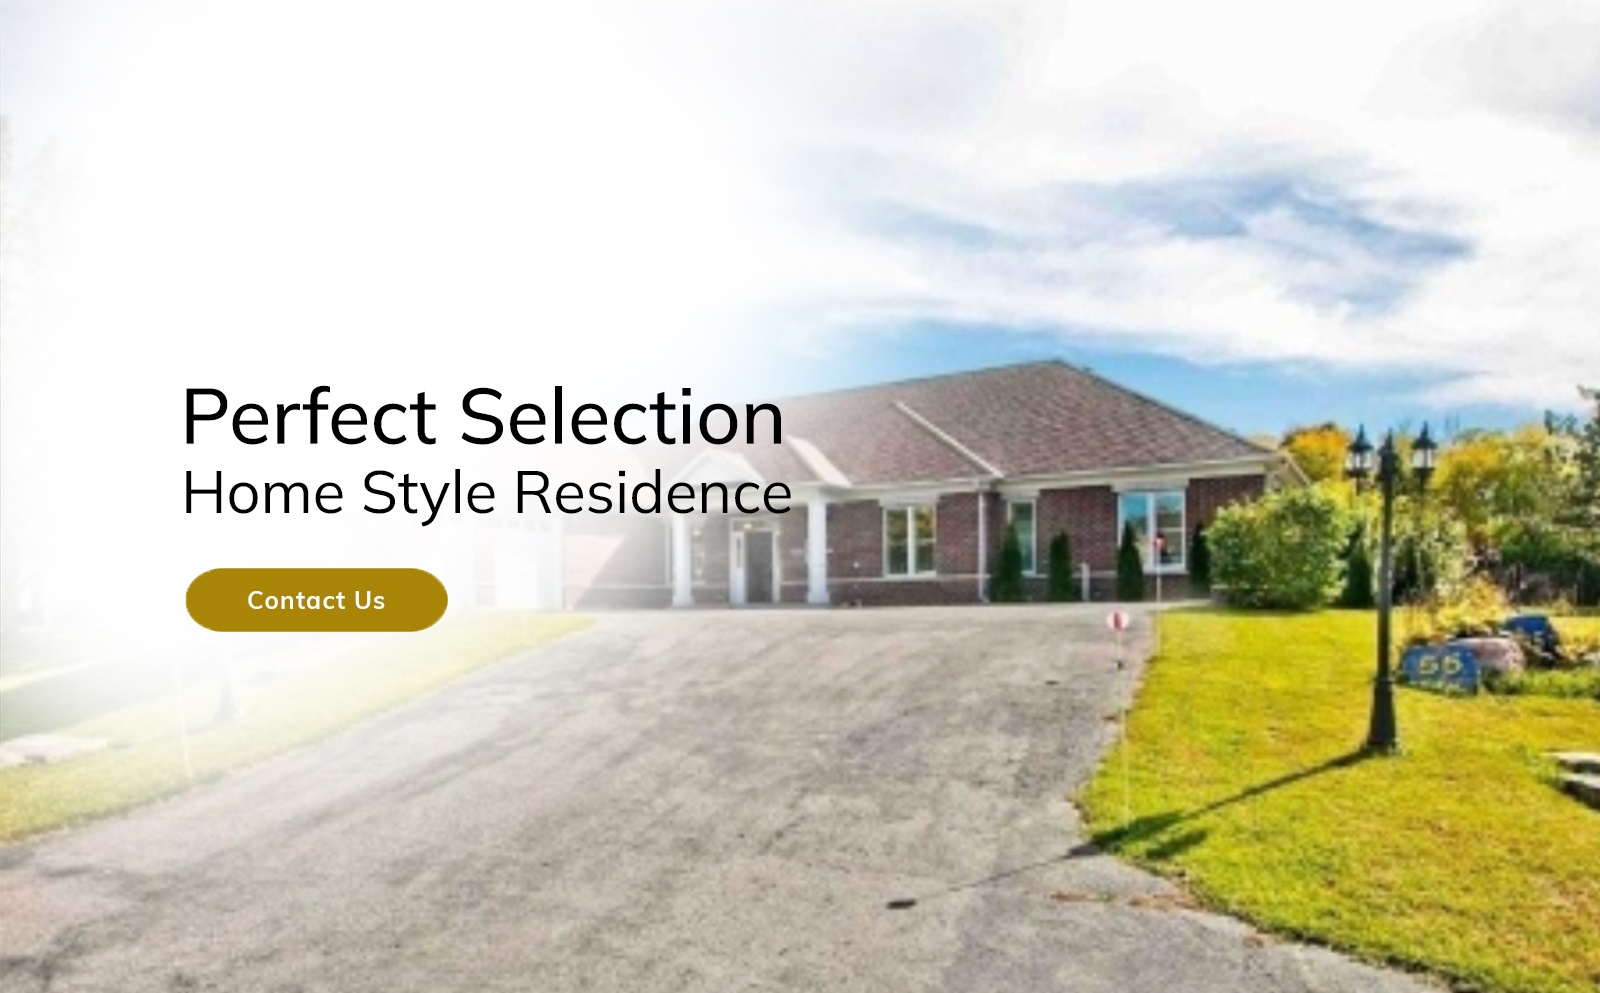 Perfect Selection Home Style Residence